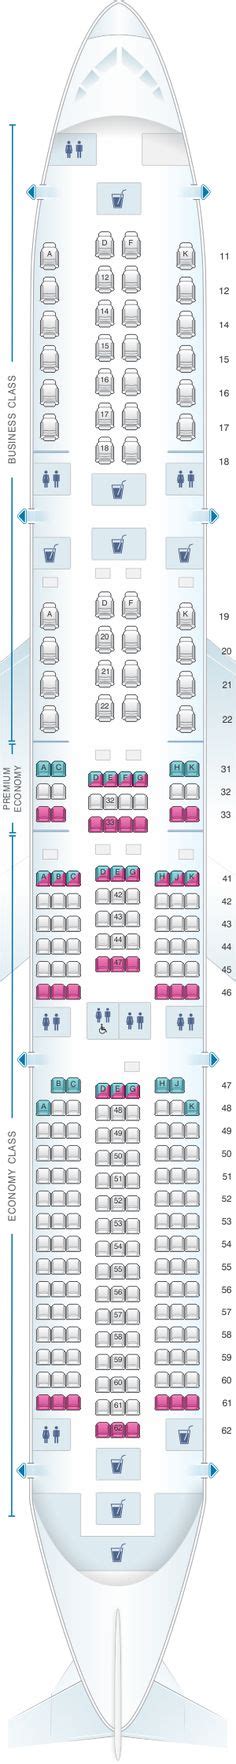 Airbus A350 900 Seat Map Vietnam Airlines